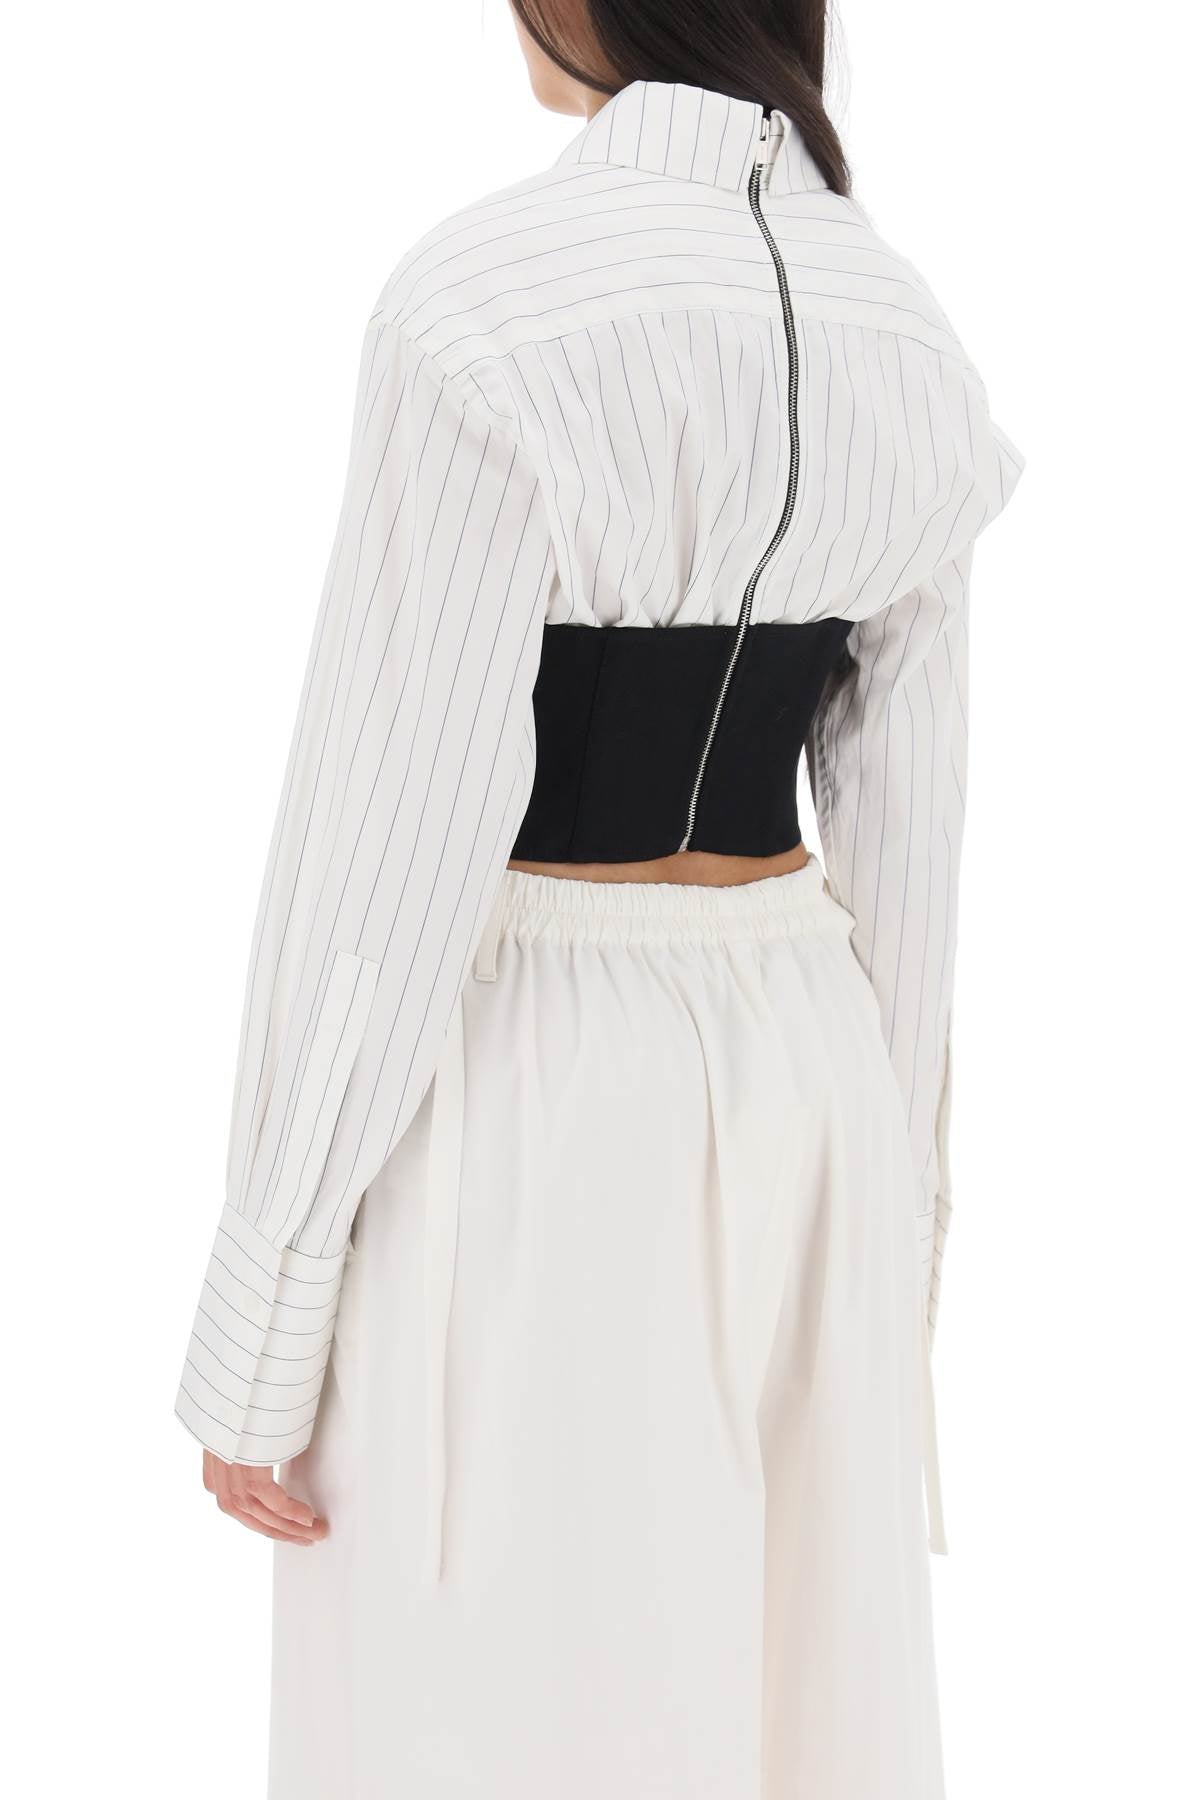 Dion lee cropped shirt with underbust corset-2